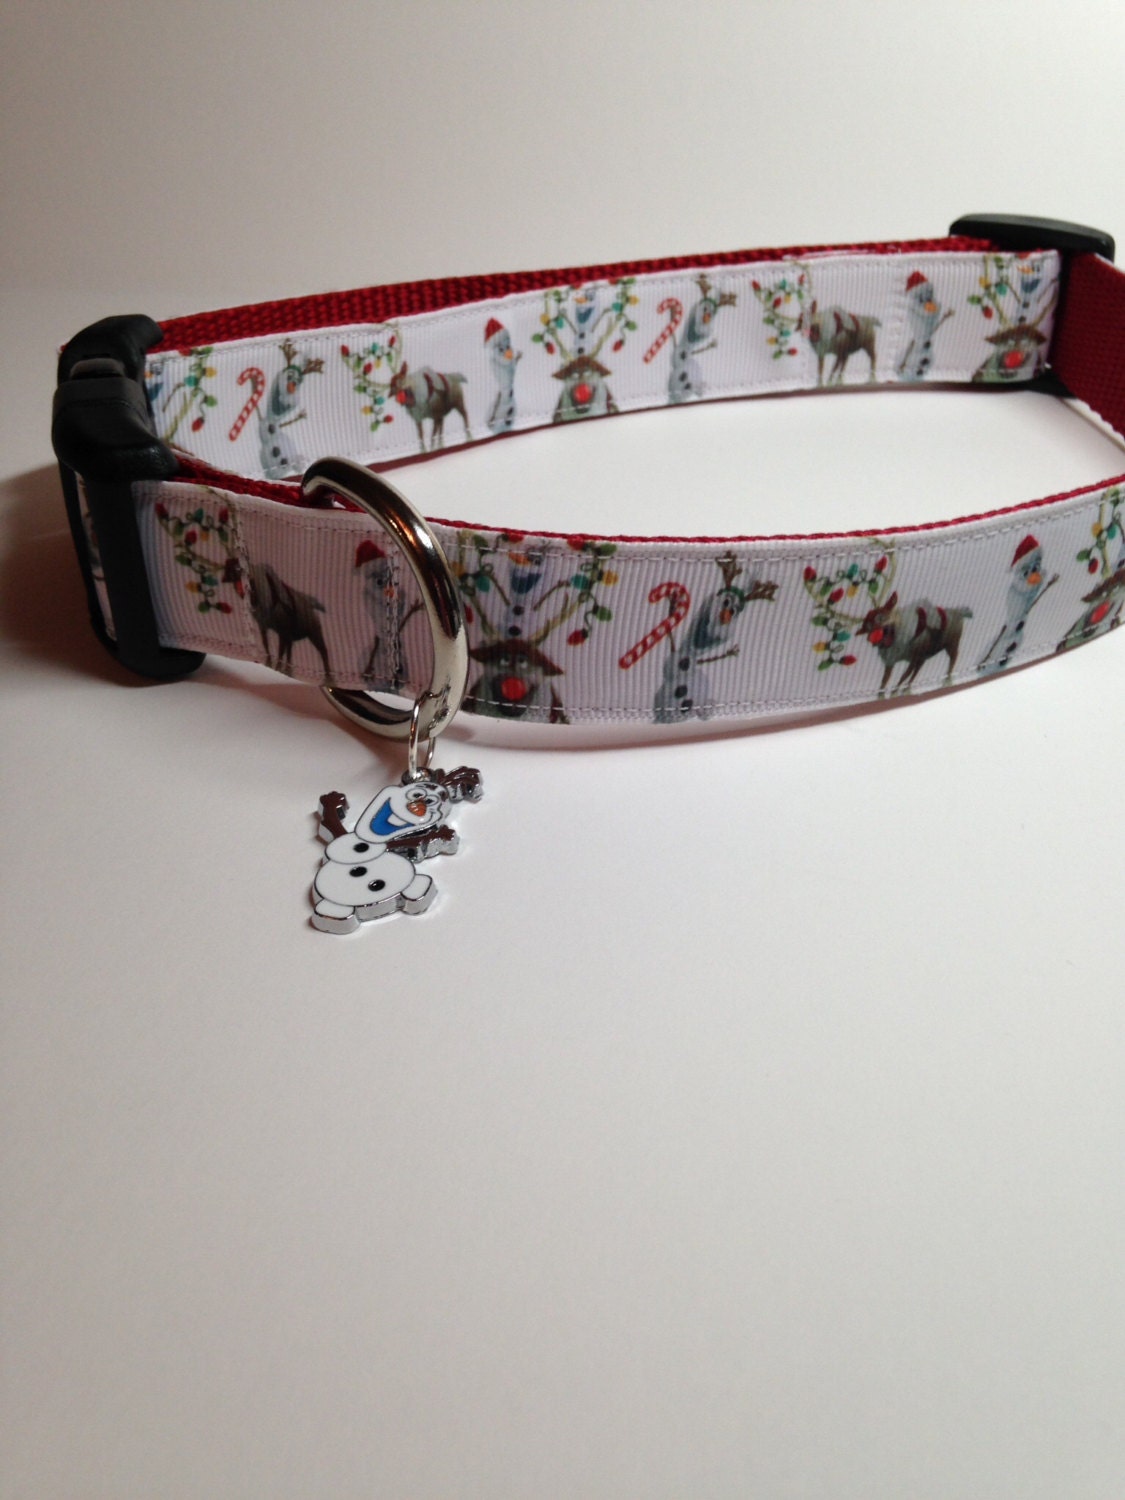 Disney's Frozen Olaf and Sven Dog Collar by ribbonswithstyle